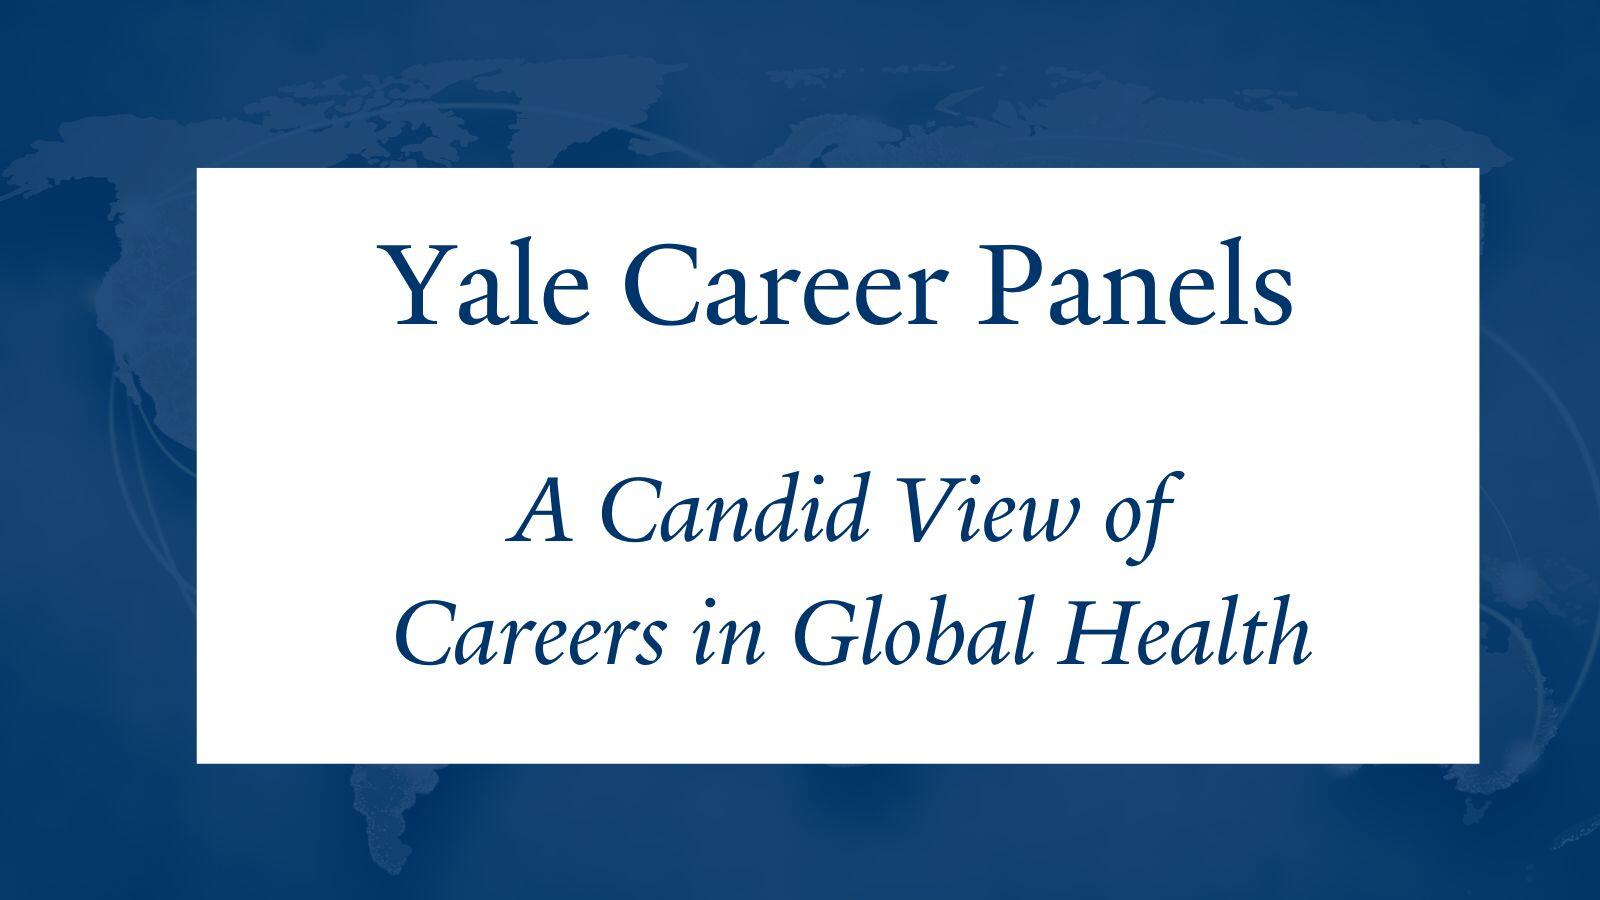 Yale Career Panels: A Candid View of Careers in Global Health